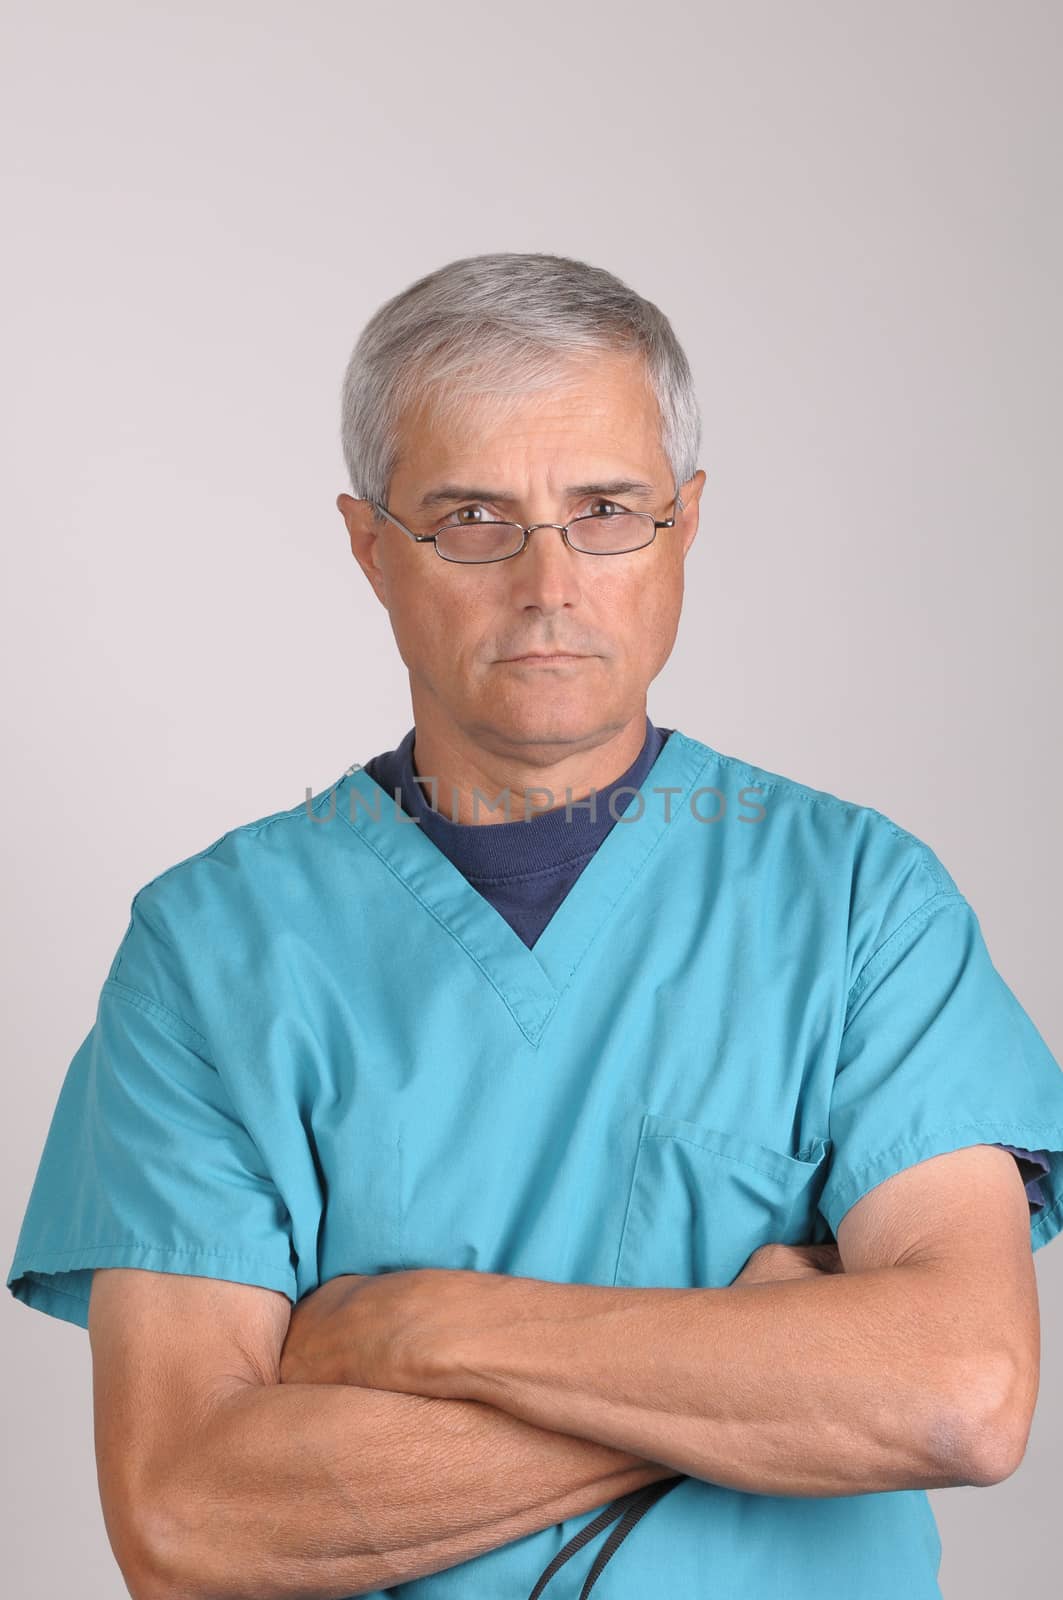 Doctor in Scrubs with Arms Crossed by sCukrov